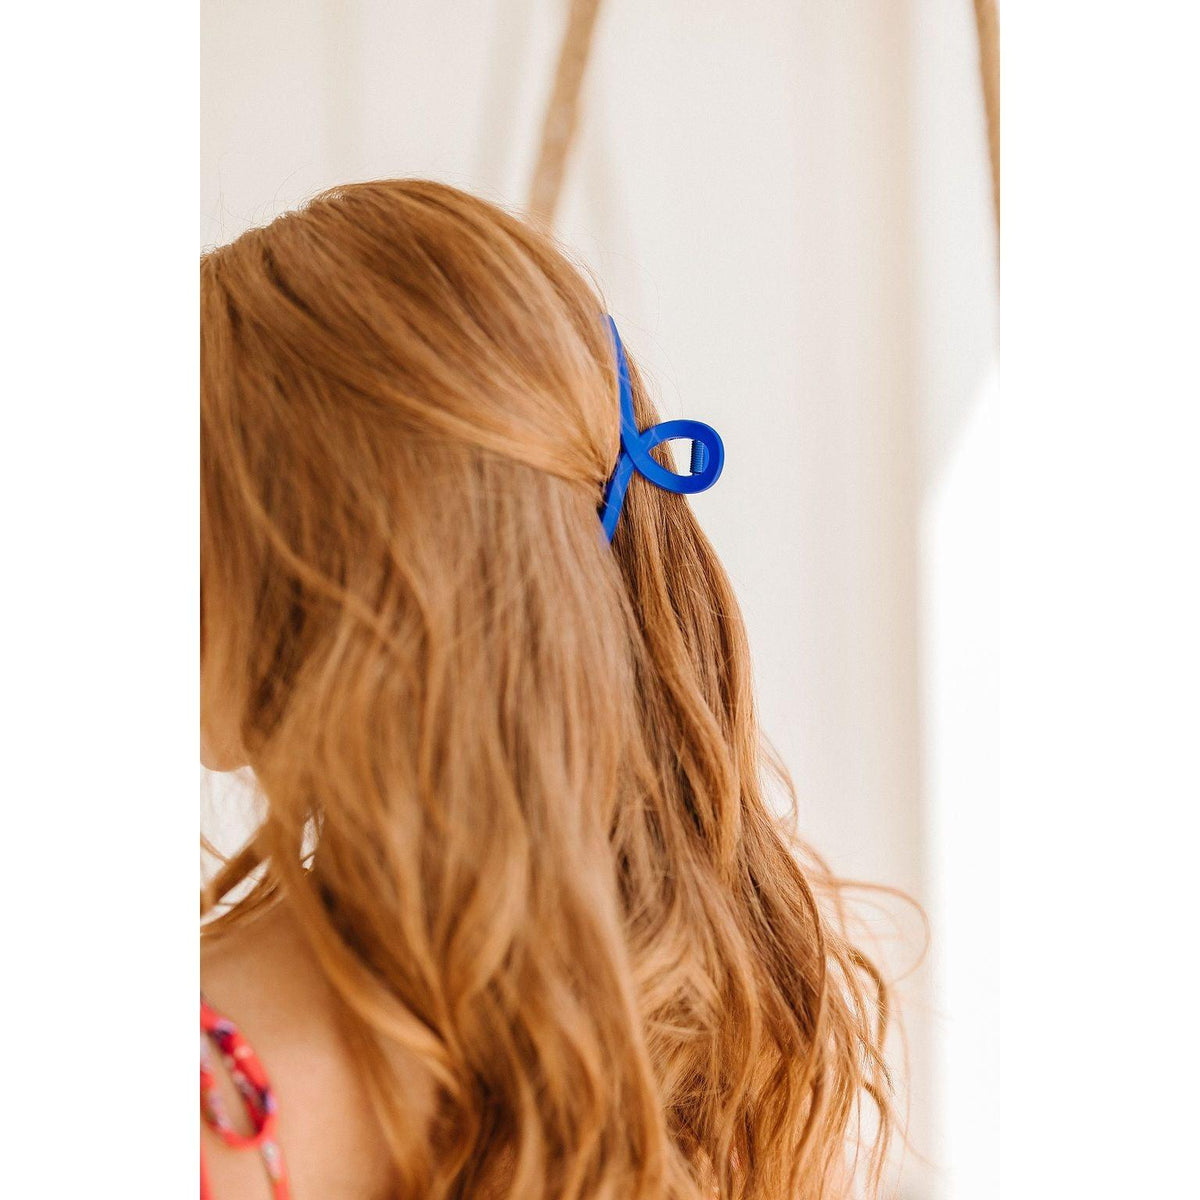 Claw Clip Set of 4 in Royal Blue - becauseofadi